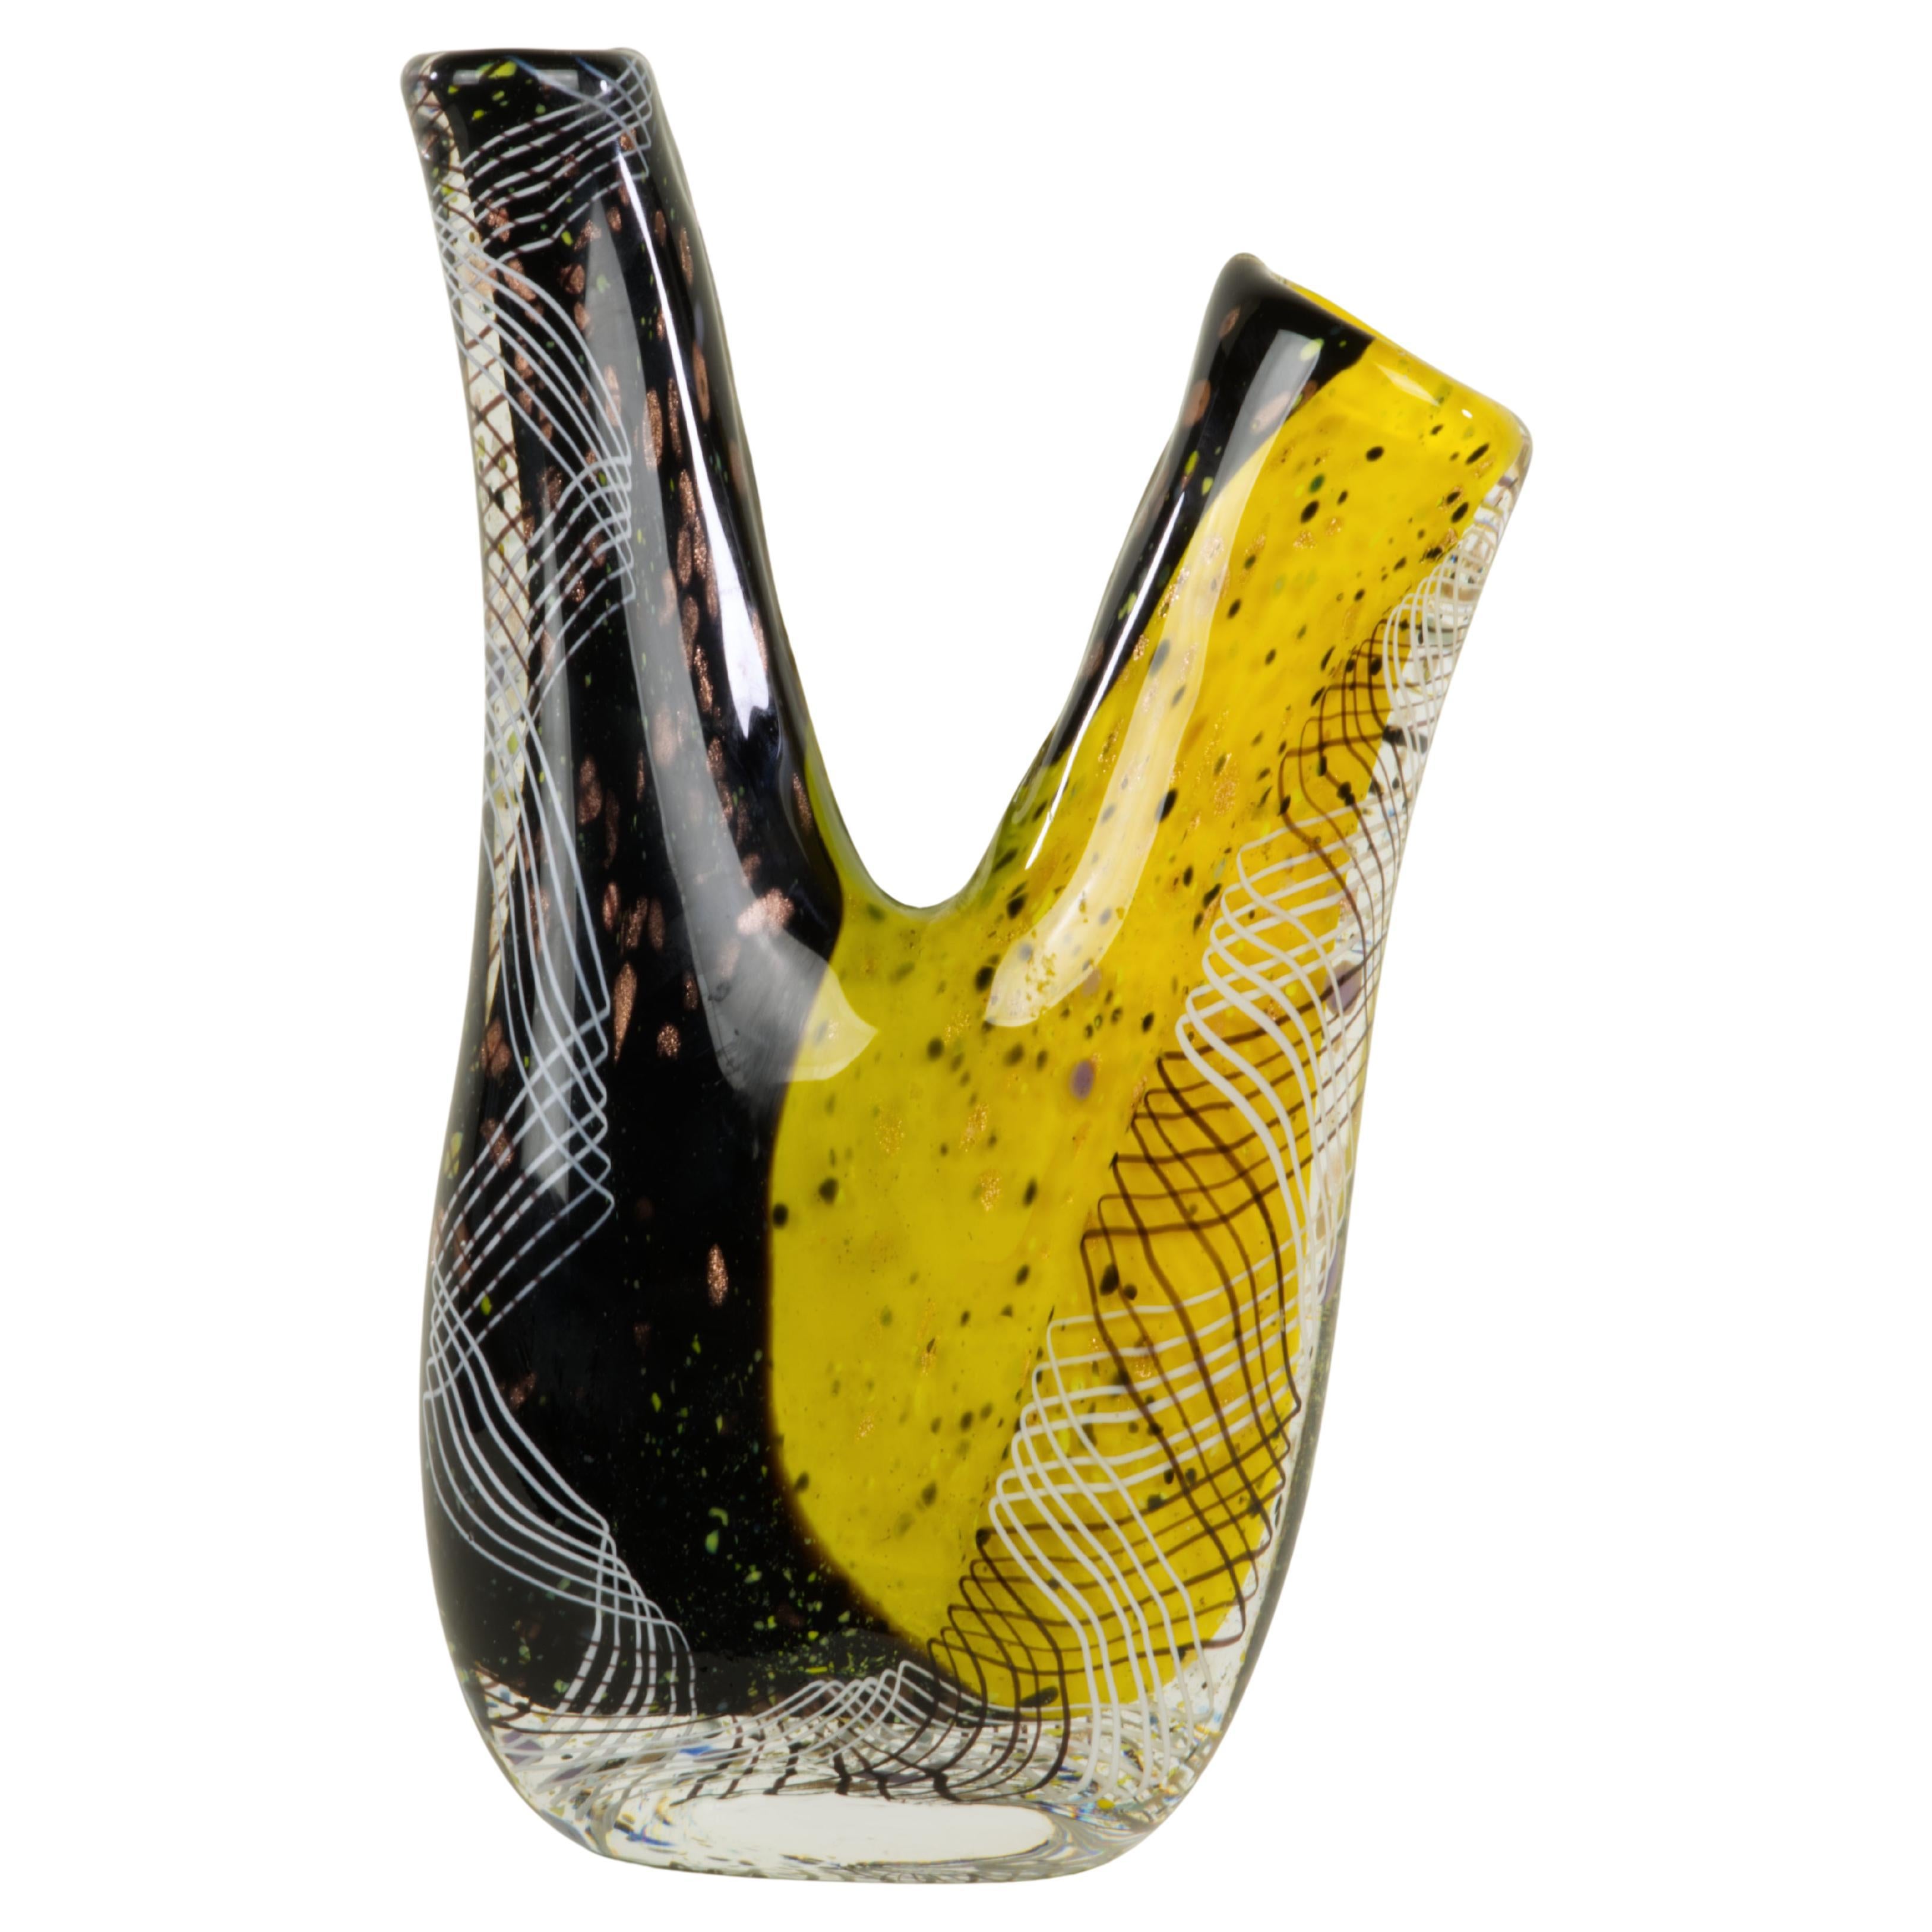 Murano style art glass vase has an unusual double spout shape and is decorated with black and white line swirls and abstract dots and gold flecks pattern on the colorful black and yellow base. It is marked with artist signature and 2005 on the base.